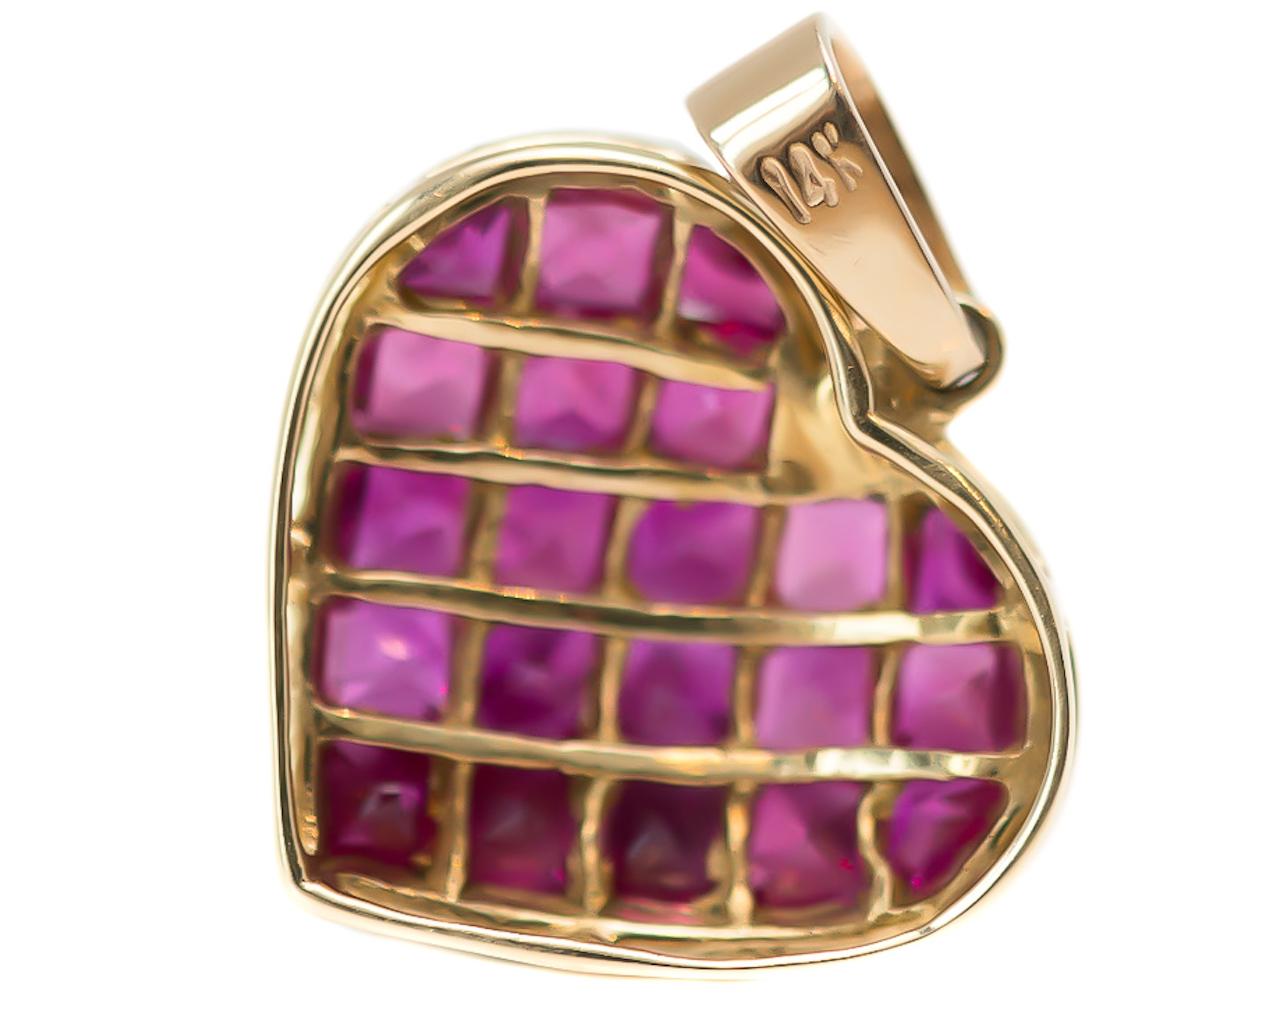 Contemporary 1970s 1.0 Carat Total Ruby and 14 Karat Yellow Gold Puffed Heart Pendant